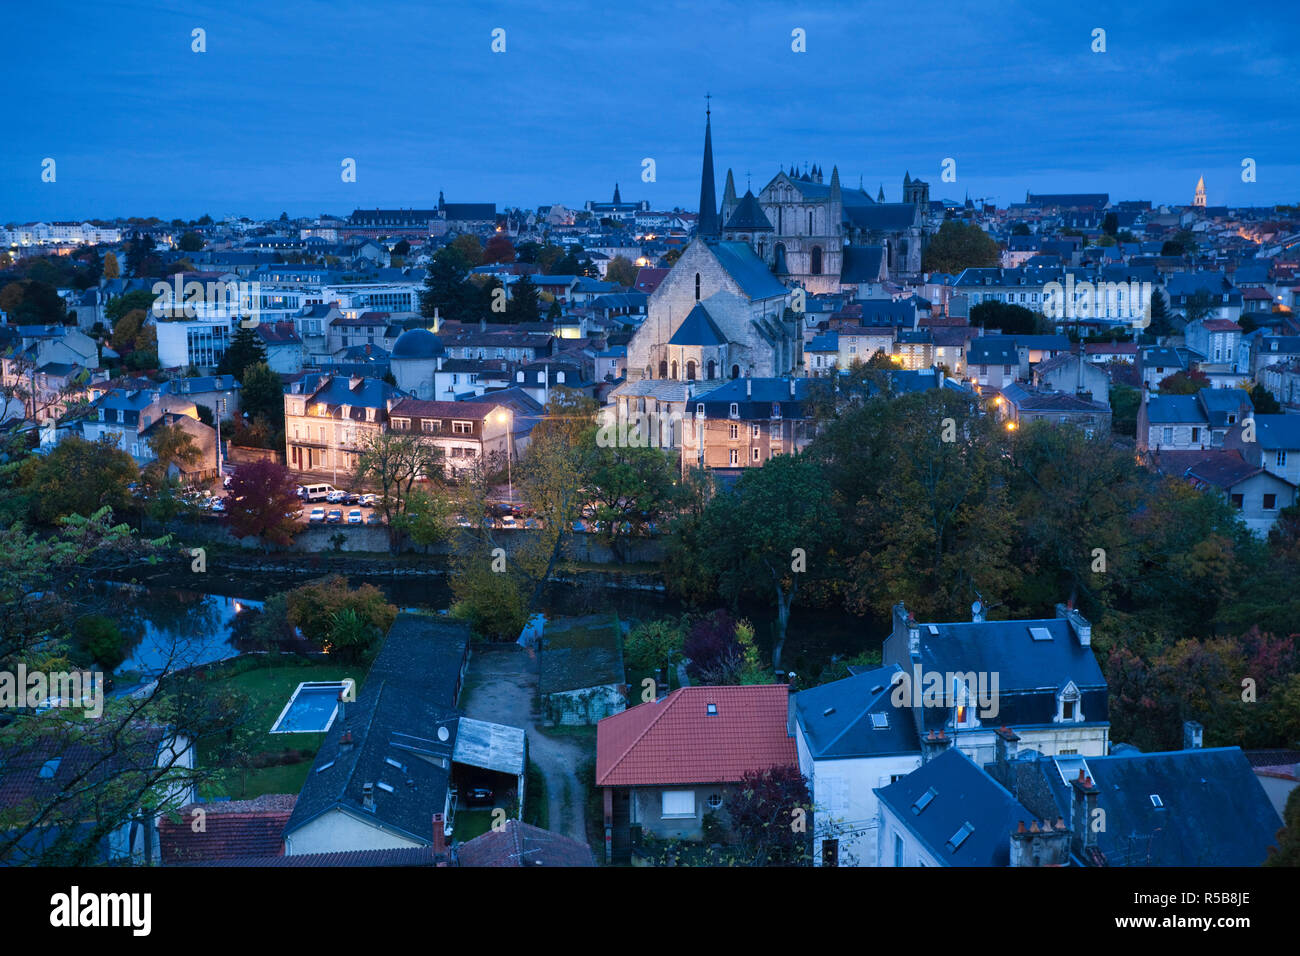 France, Poitou-Charentes Region, Vienne Department, Poitiers, elevated view of town and Cathedrale St-Pierre, dawn Stock Photo